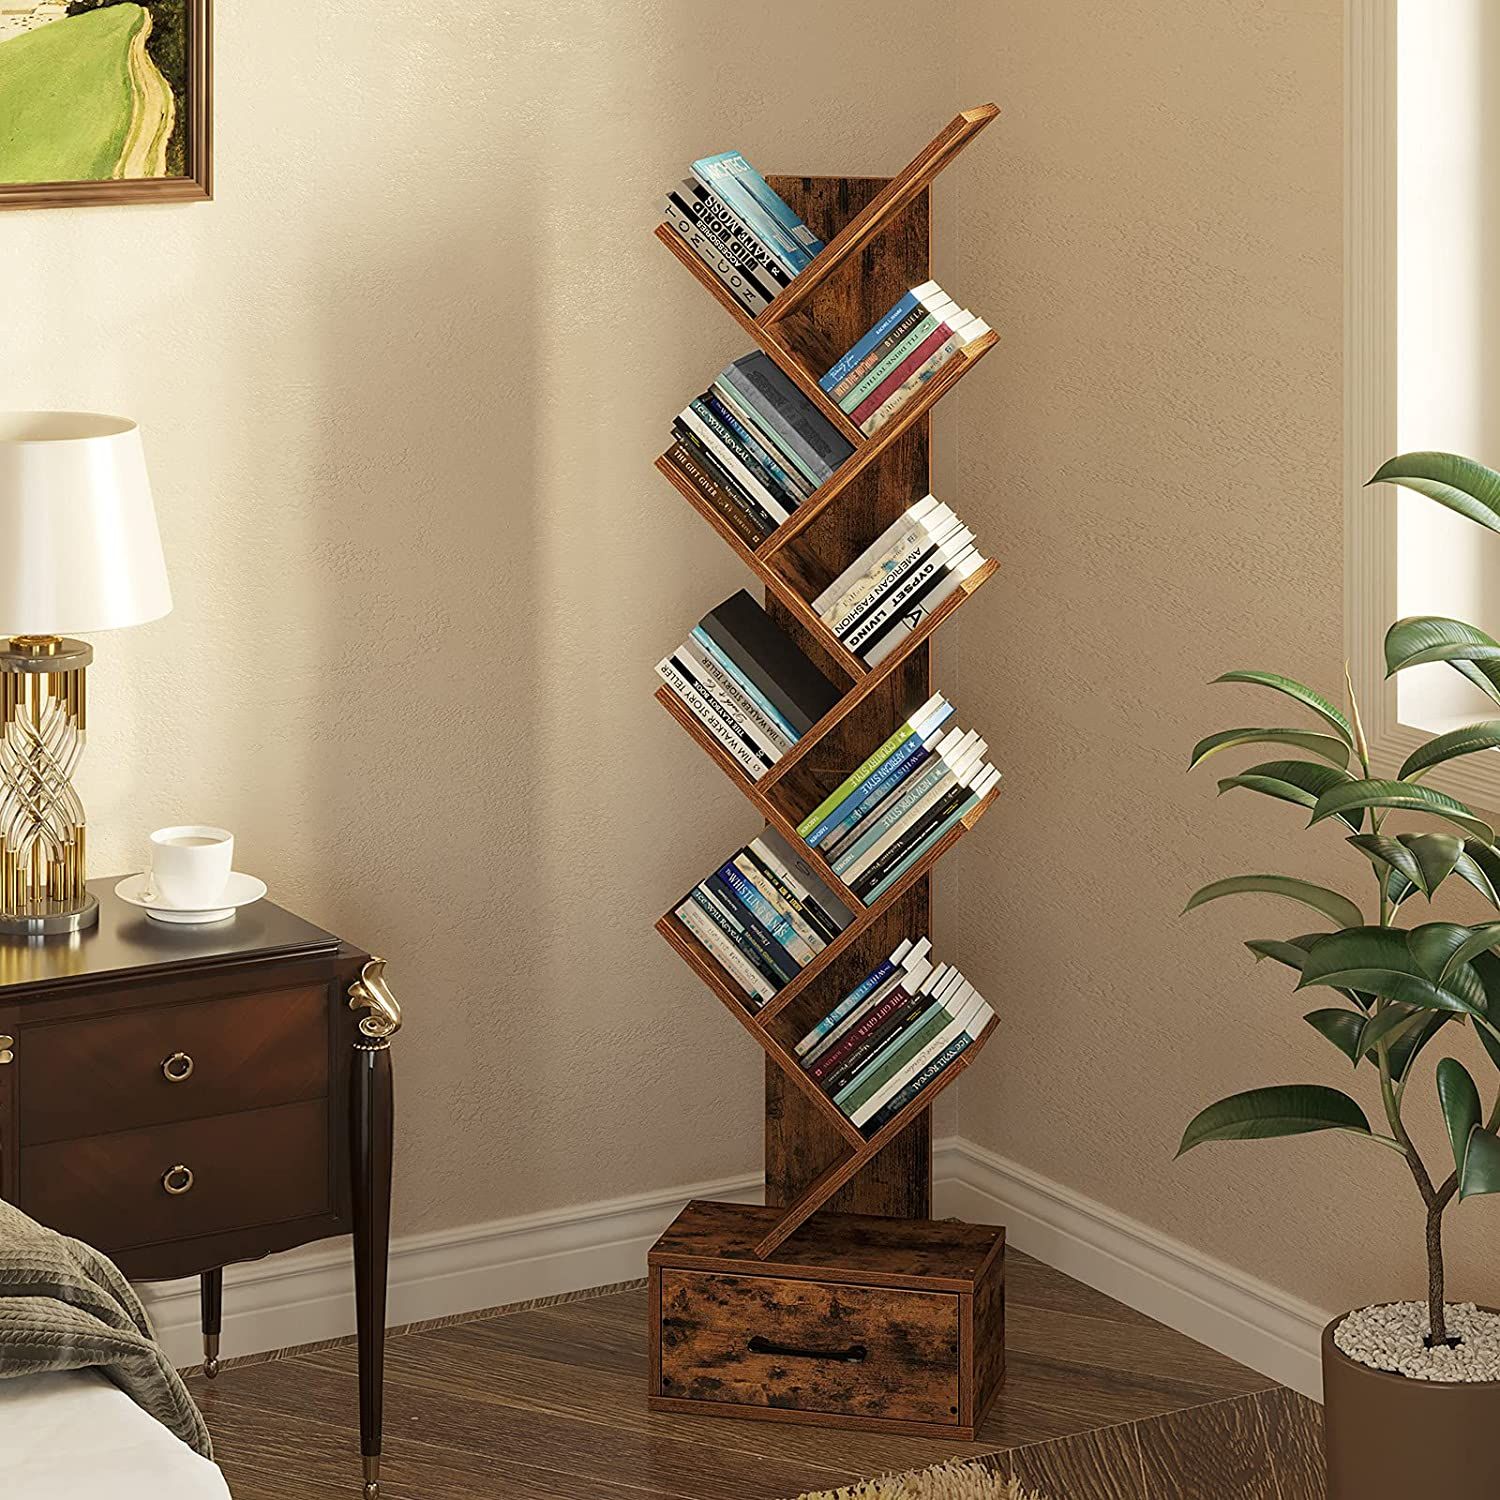 tree style bookcase full of books